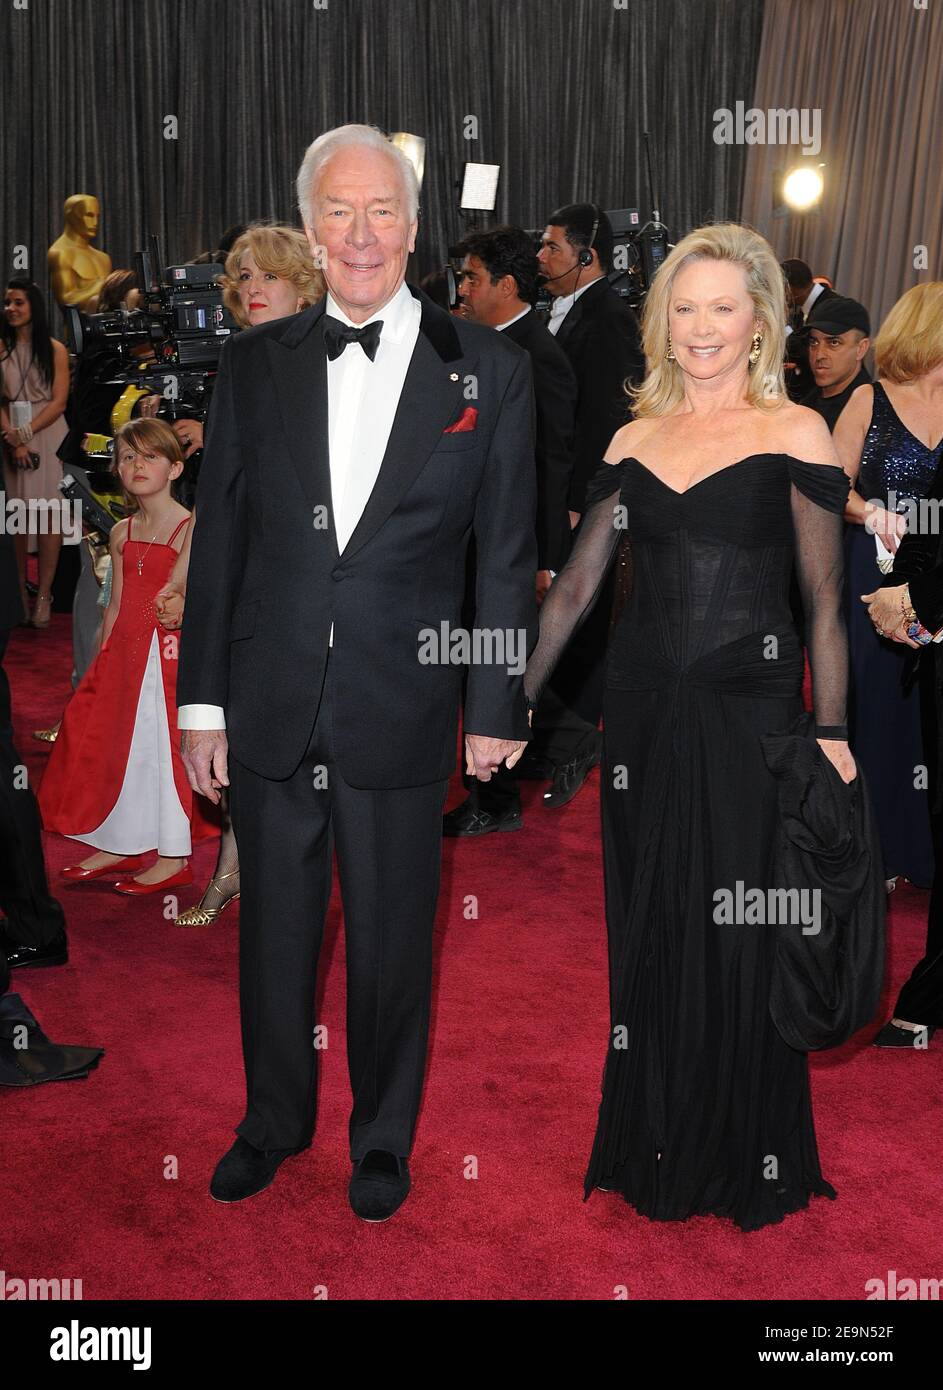 File photo dated 24/02/13 of Christopher Plummer and wife Elaine arriving for the 85th Academy Awards at the Dolby Theatre, Los Angeles. Christopher Plummer has died aged 91, according to his manager. Issue date: Friday February 5, 2021. Stock Photo